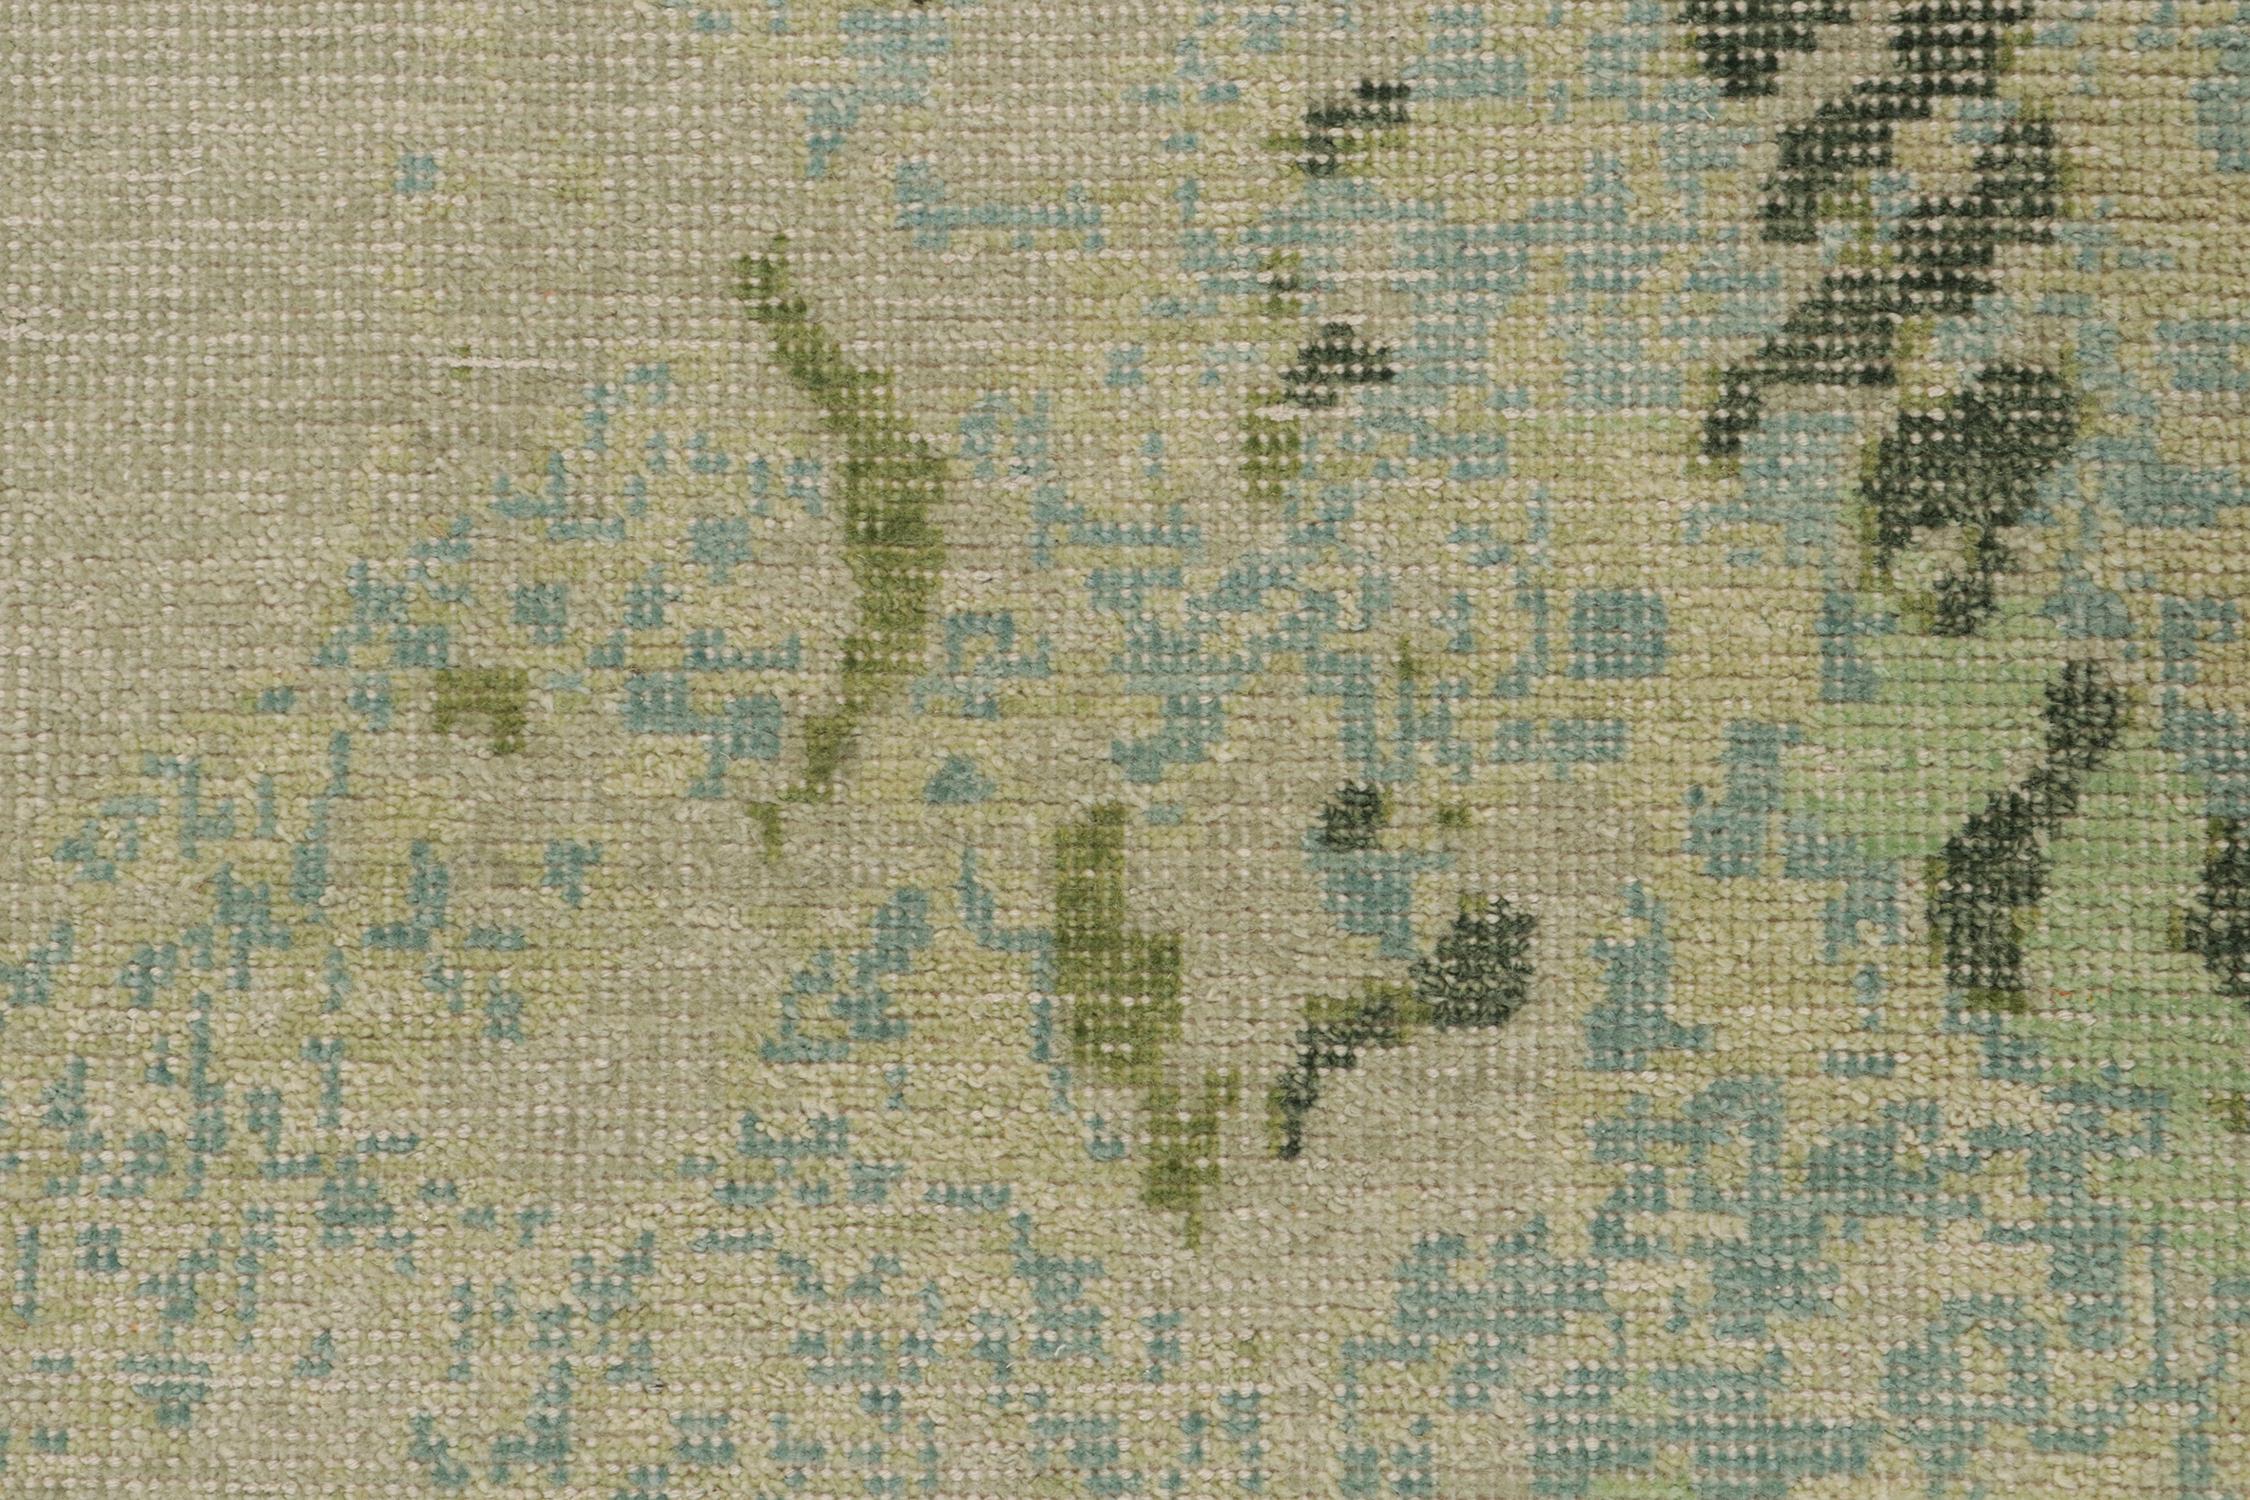 Rug & Kilim's Distressed Style Abstract Rug in Blue, Gray and Green Pattern (Tapis abstrait à motifs bleus, gris et verts) Neuf - En vente à Long Island City, NY